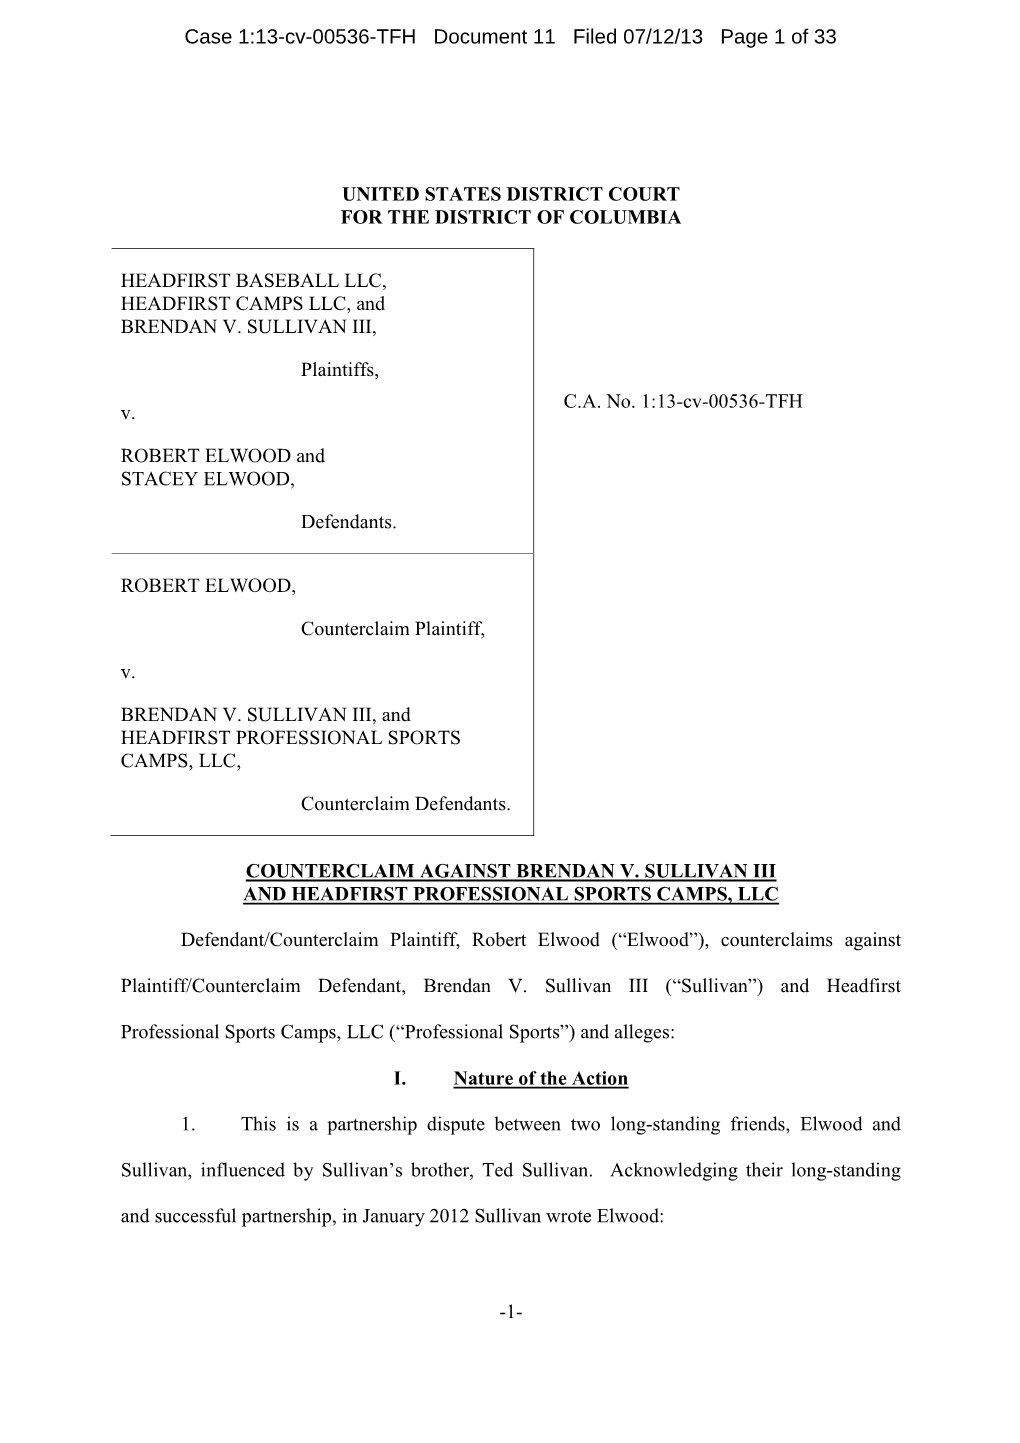 Case 1:13-Cv-00536-TFH Document 11 Filed 07/12/13 Page 1 of 33